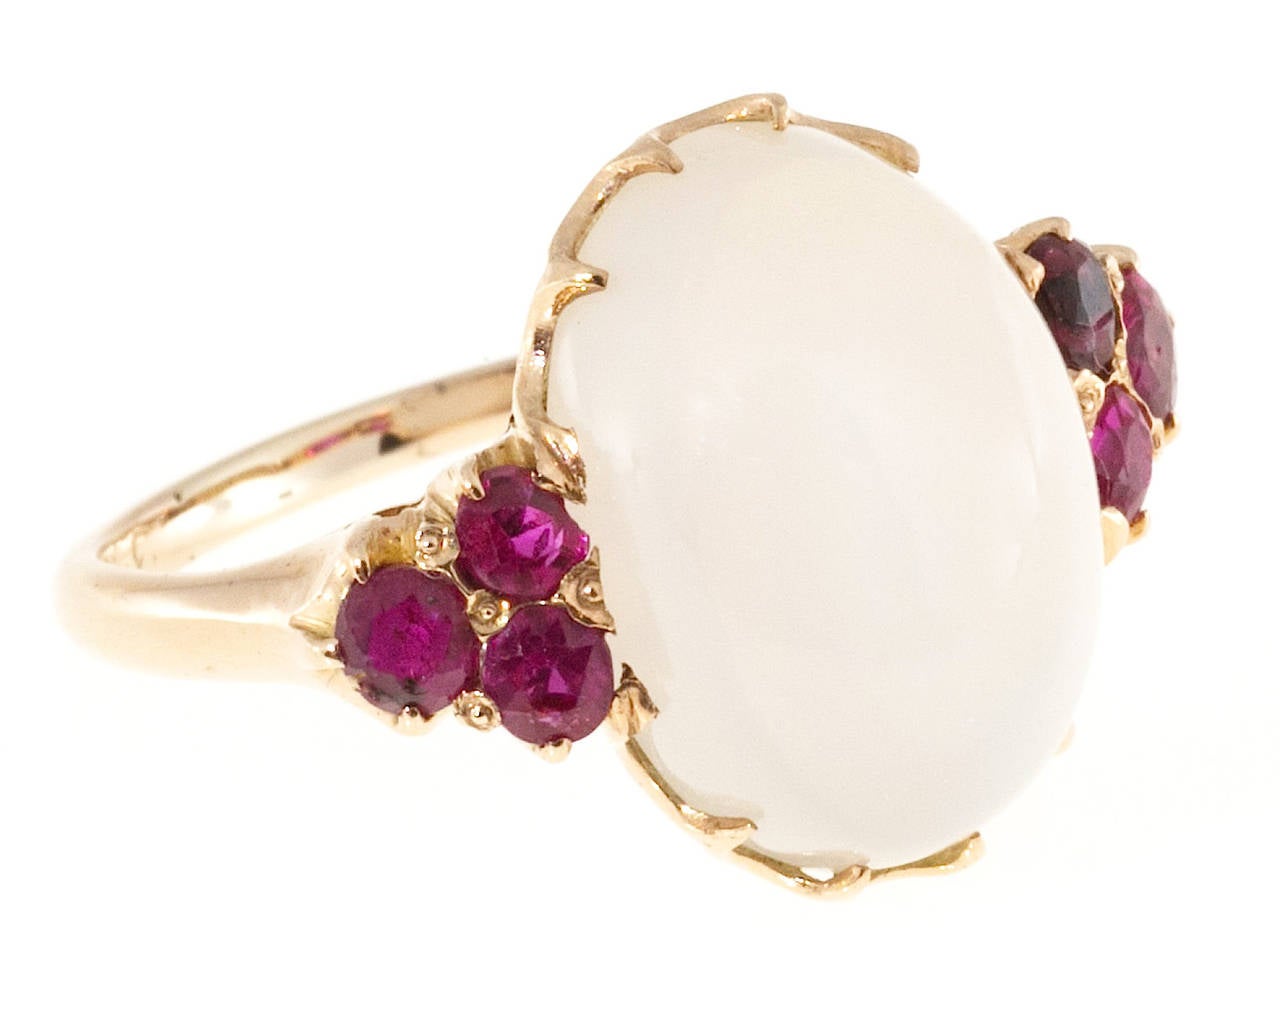 Original 14k pink gold Retro Art Deco 1943 Moonstone and Ruby ring.  On a pink gold scale of 1 to 10 with 10 as the deepest pink this scores a 7.

1 oval clear, slightly milky translucent Moonstone, approx. total weight 5.50cts, VS 15.5 x 10.5 x